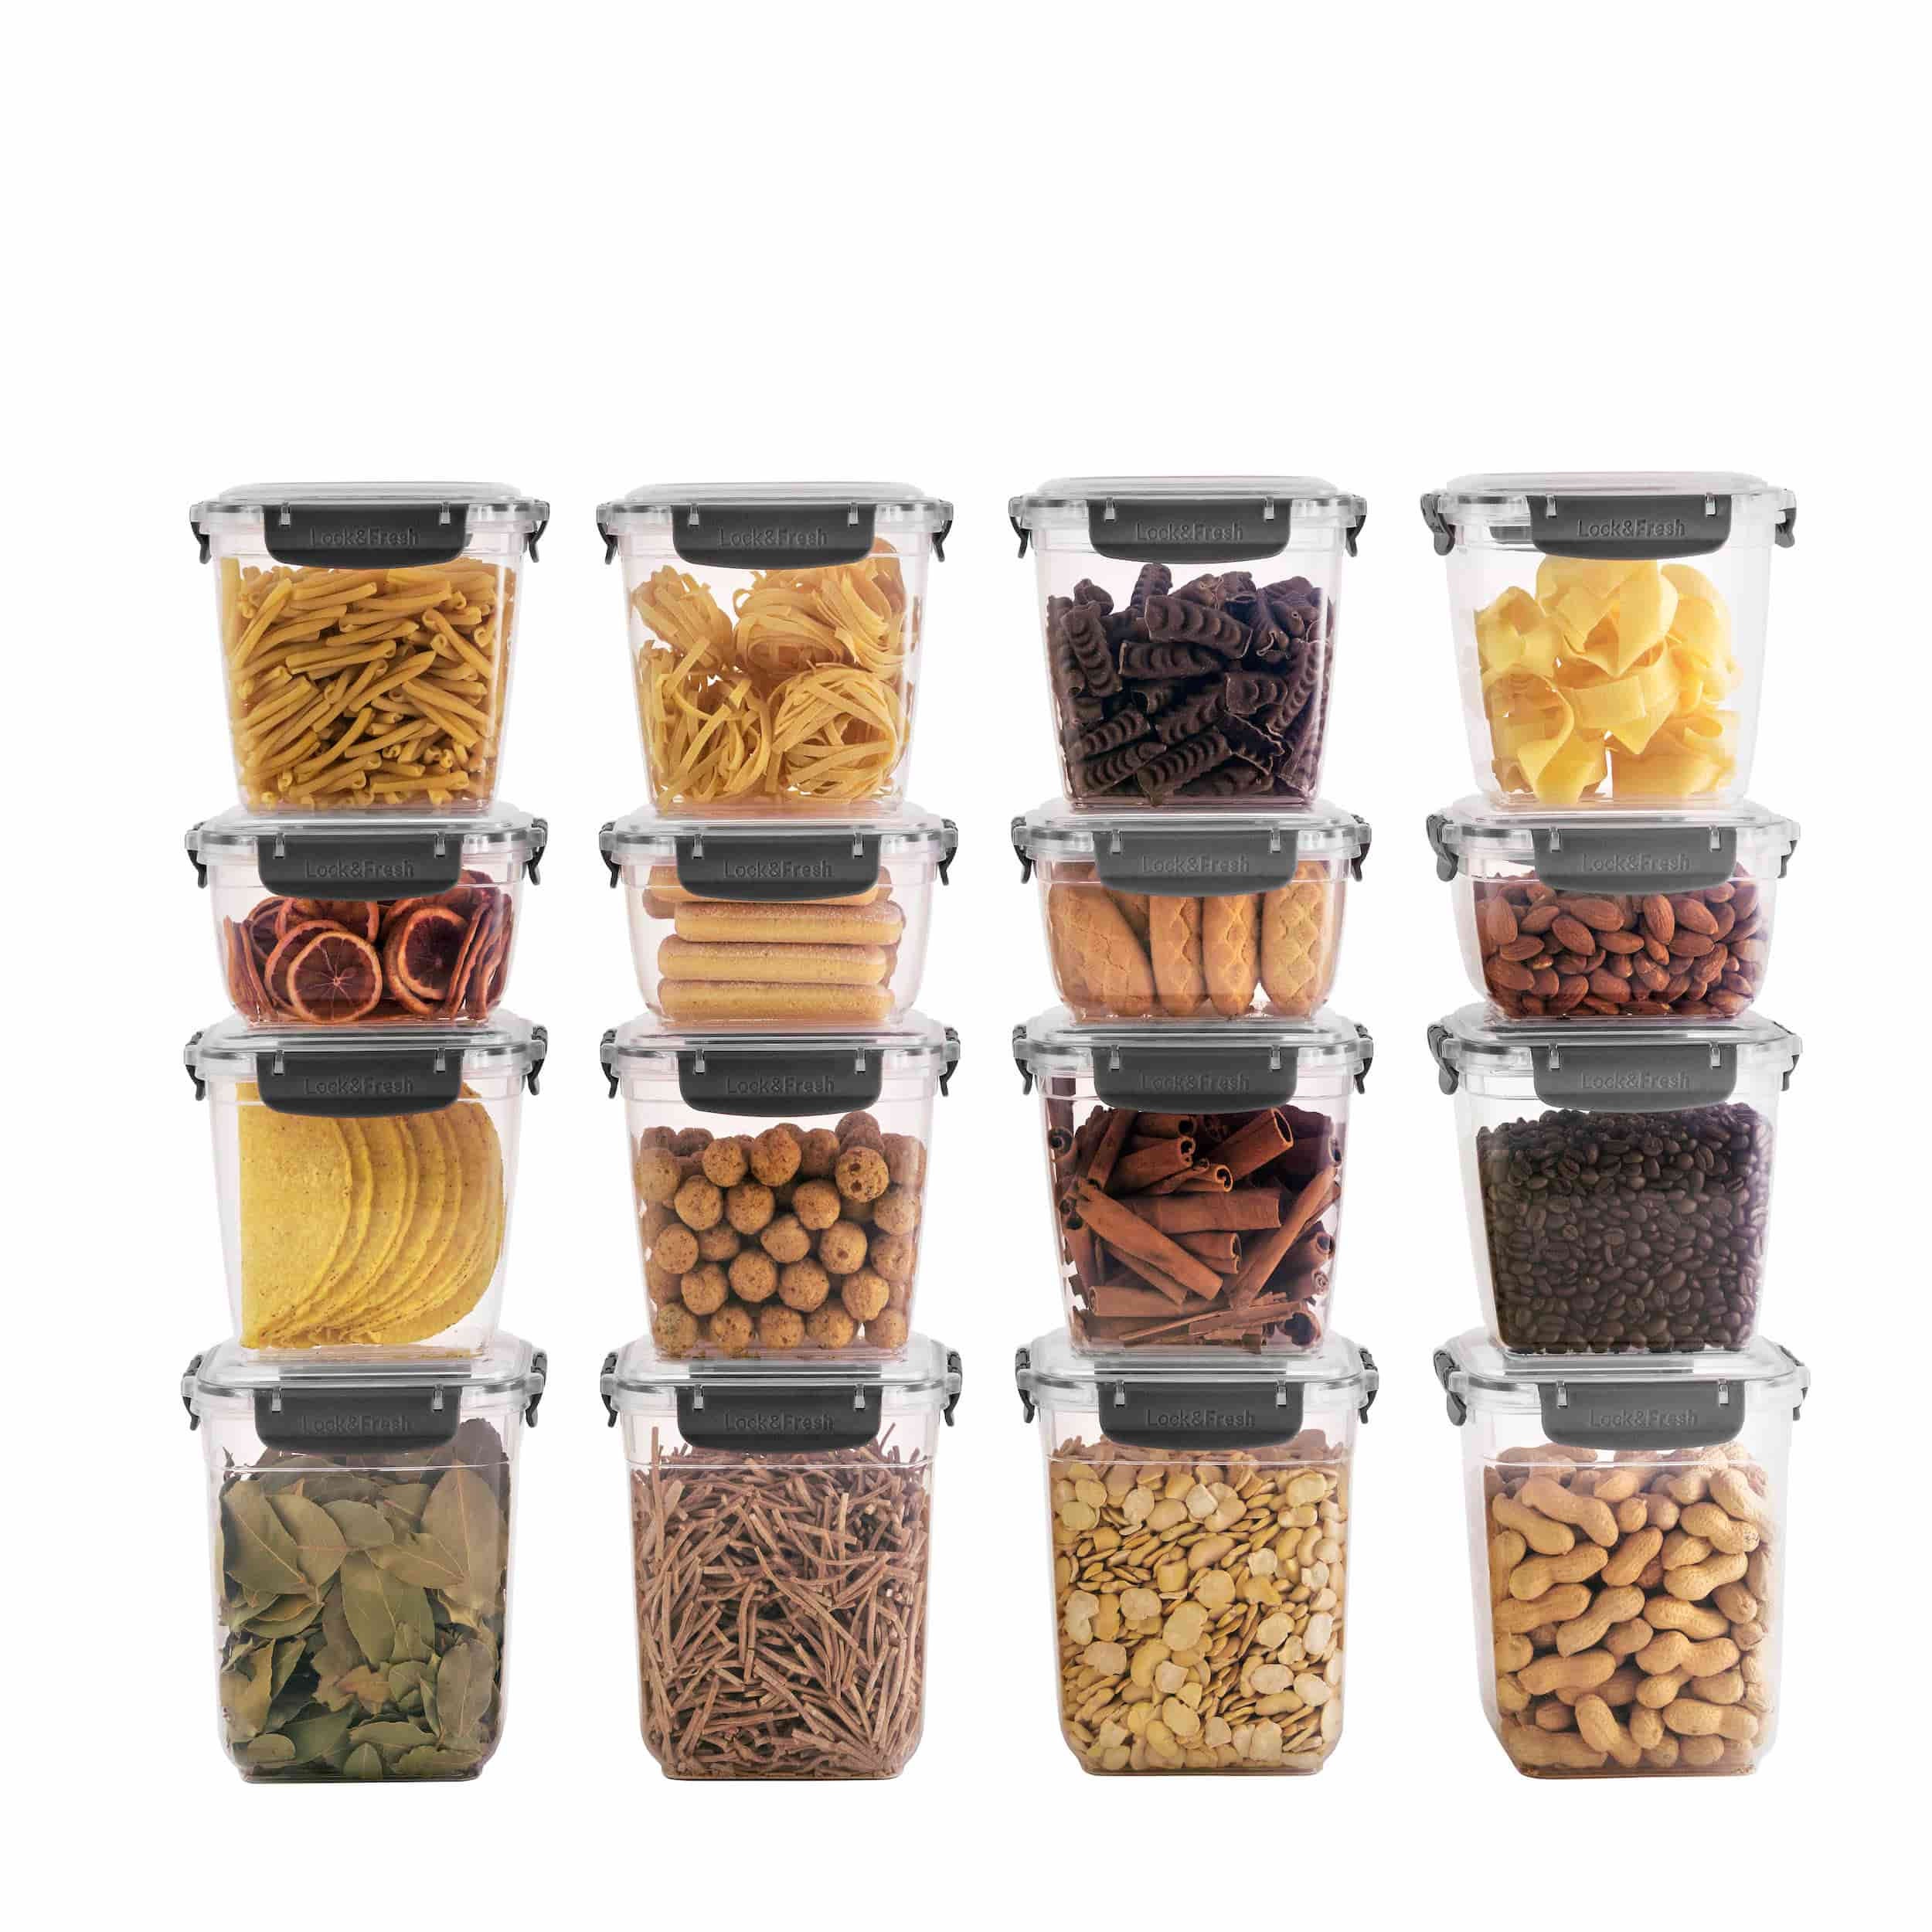 Airtight Food Storage Containers (Set of 6/1.5L) for Kitchen & Pantry  Organization - Clear Plastic Canisters for Cookies, Herbs, Spices, Dry Food  Storage - Snack Containers with Lock Lids